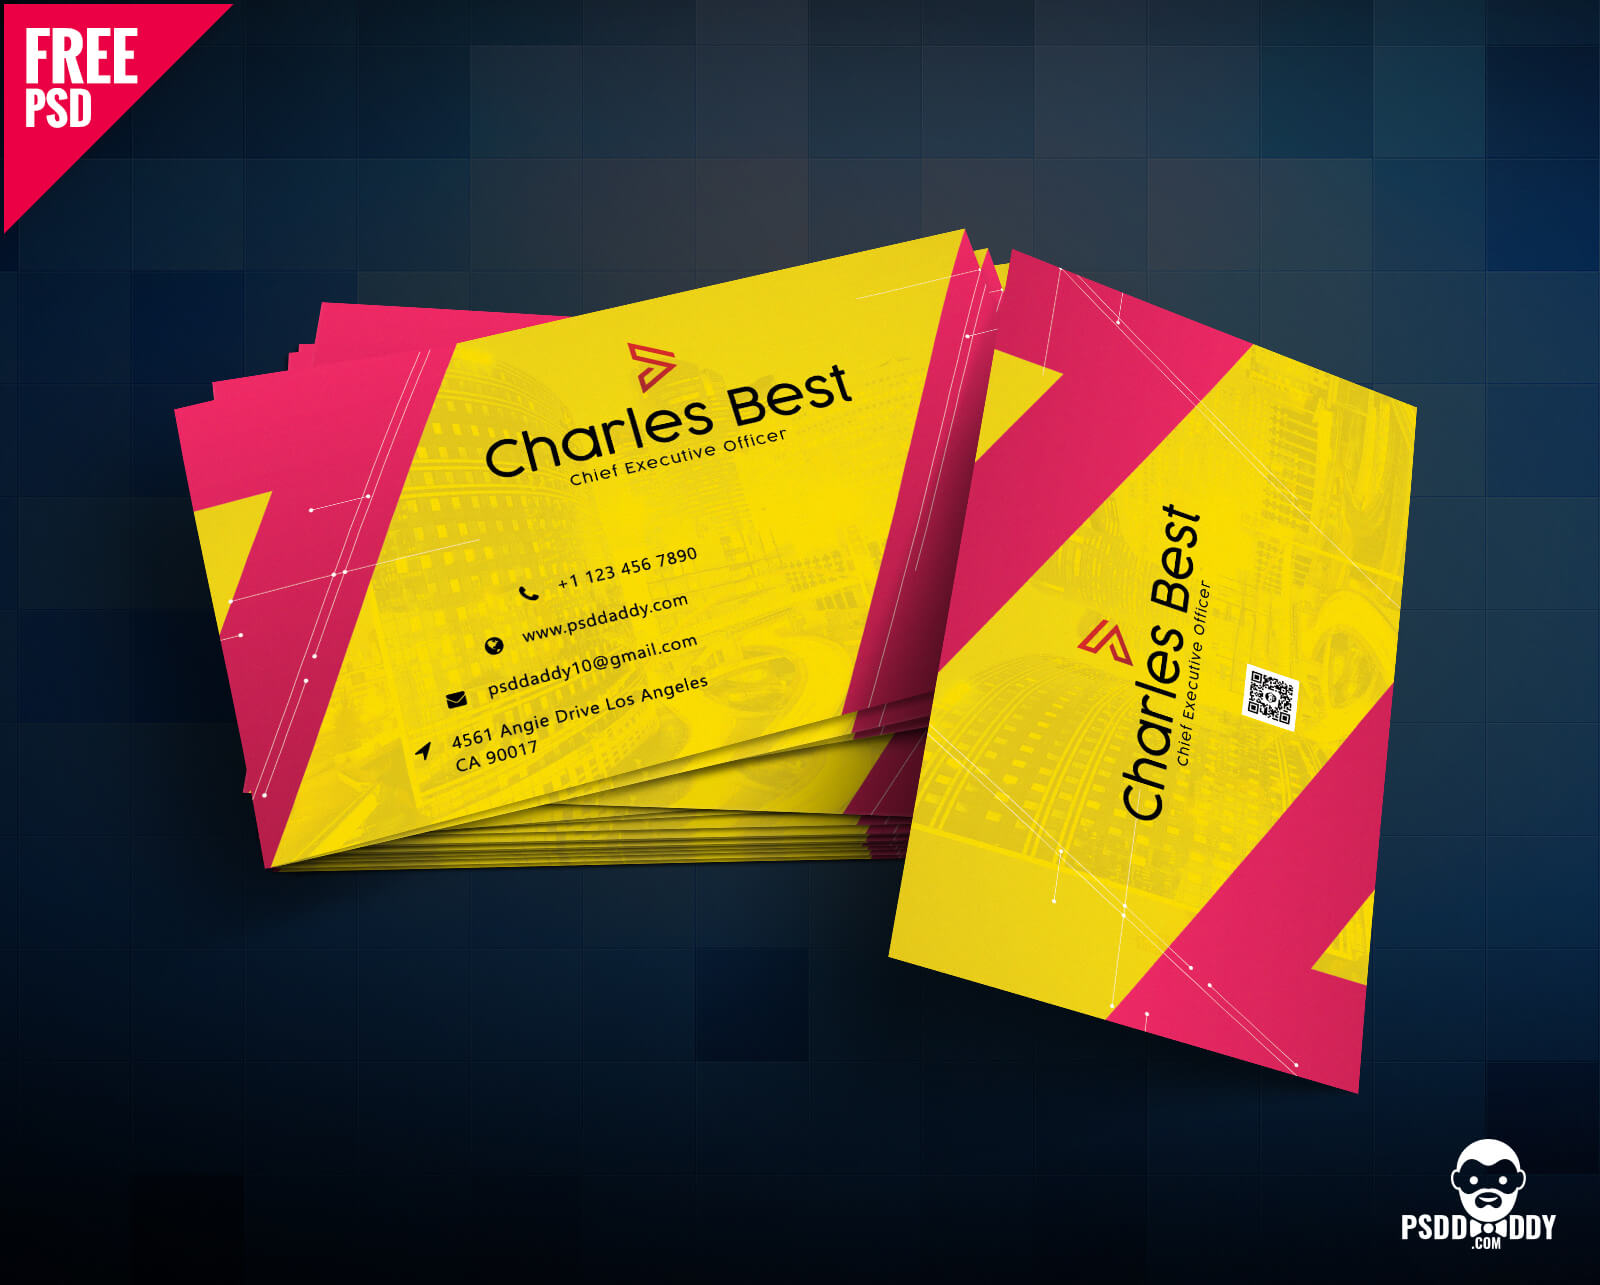 Download] Creative Business Card Free Psd | Psddaddy Throughout Photoshop Name Card Template